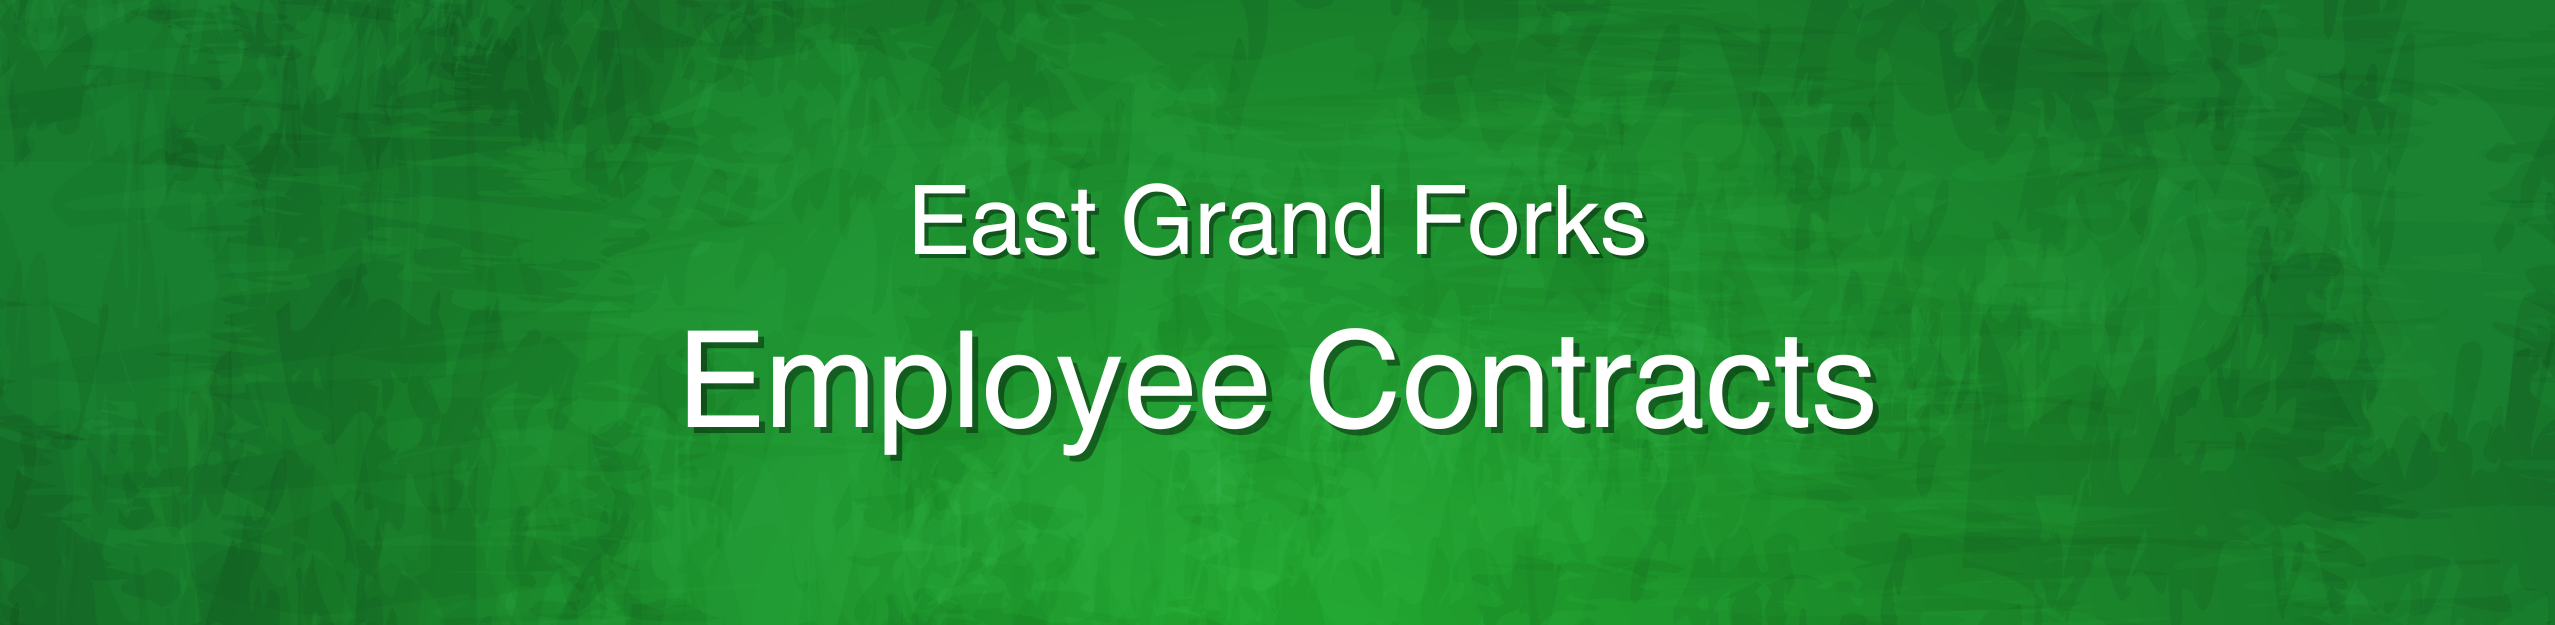 East Grand Forks Employee Contracts